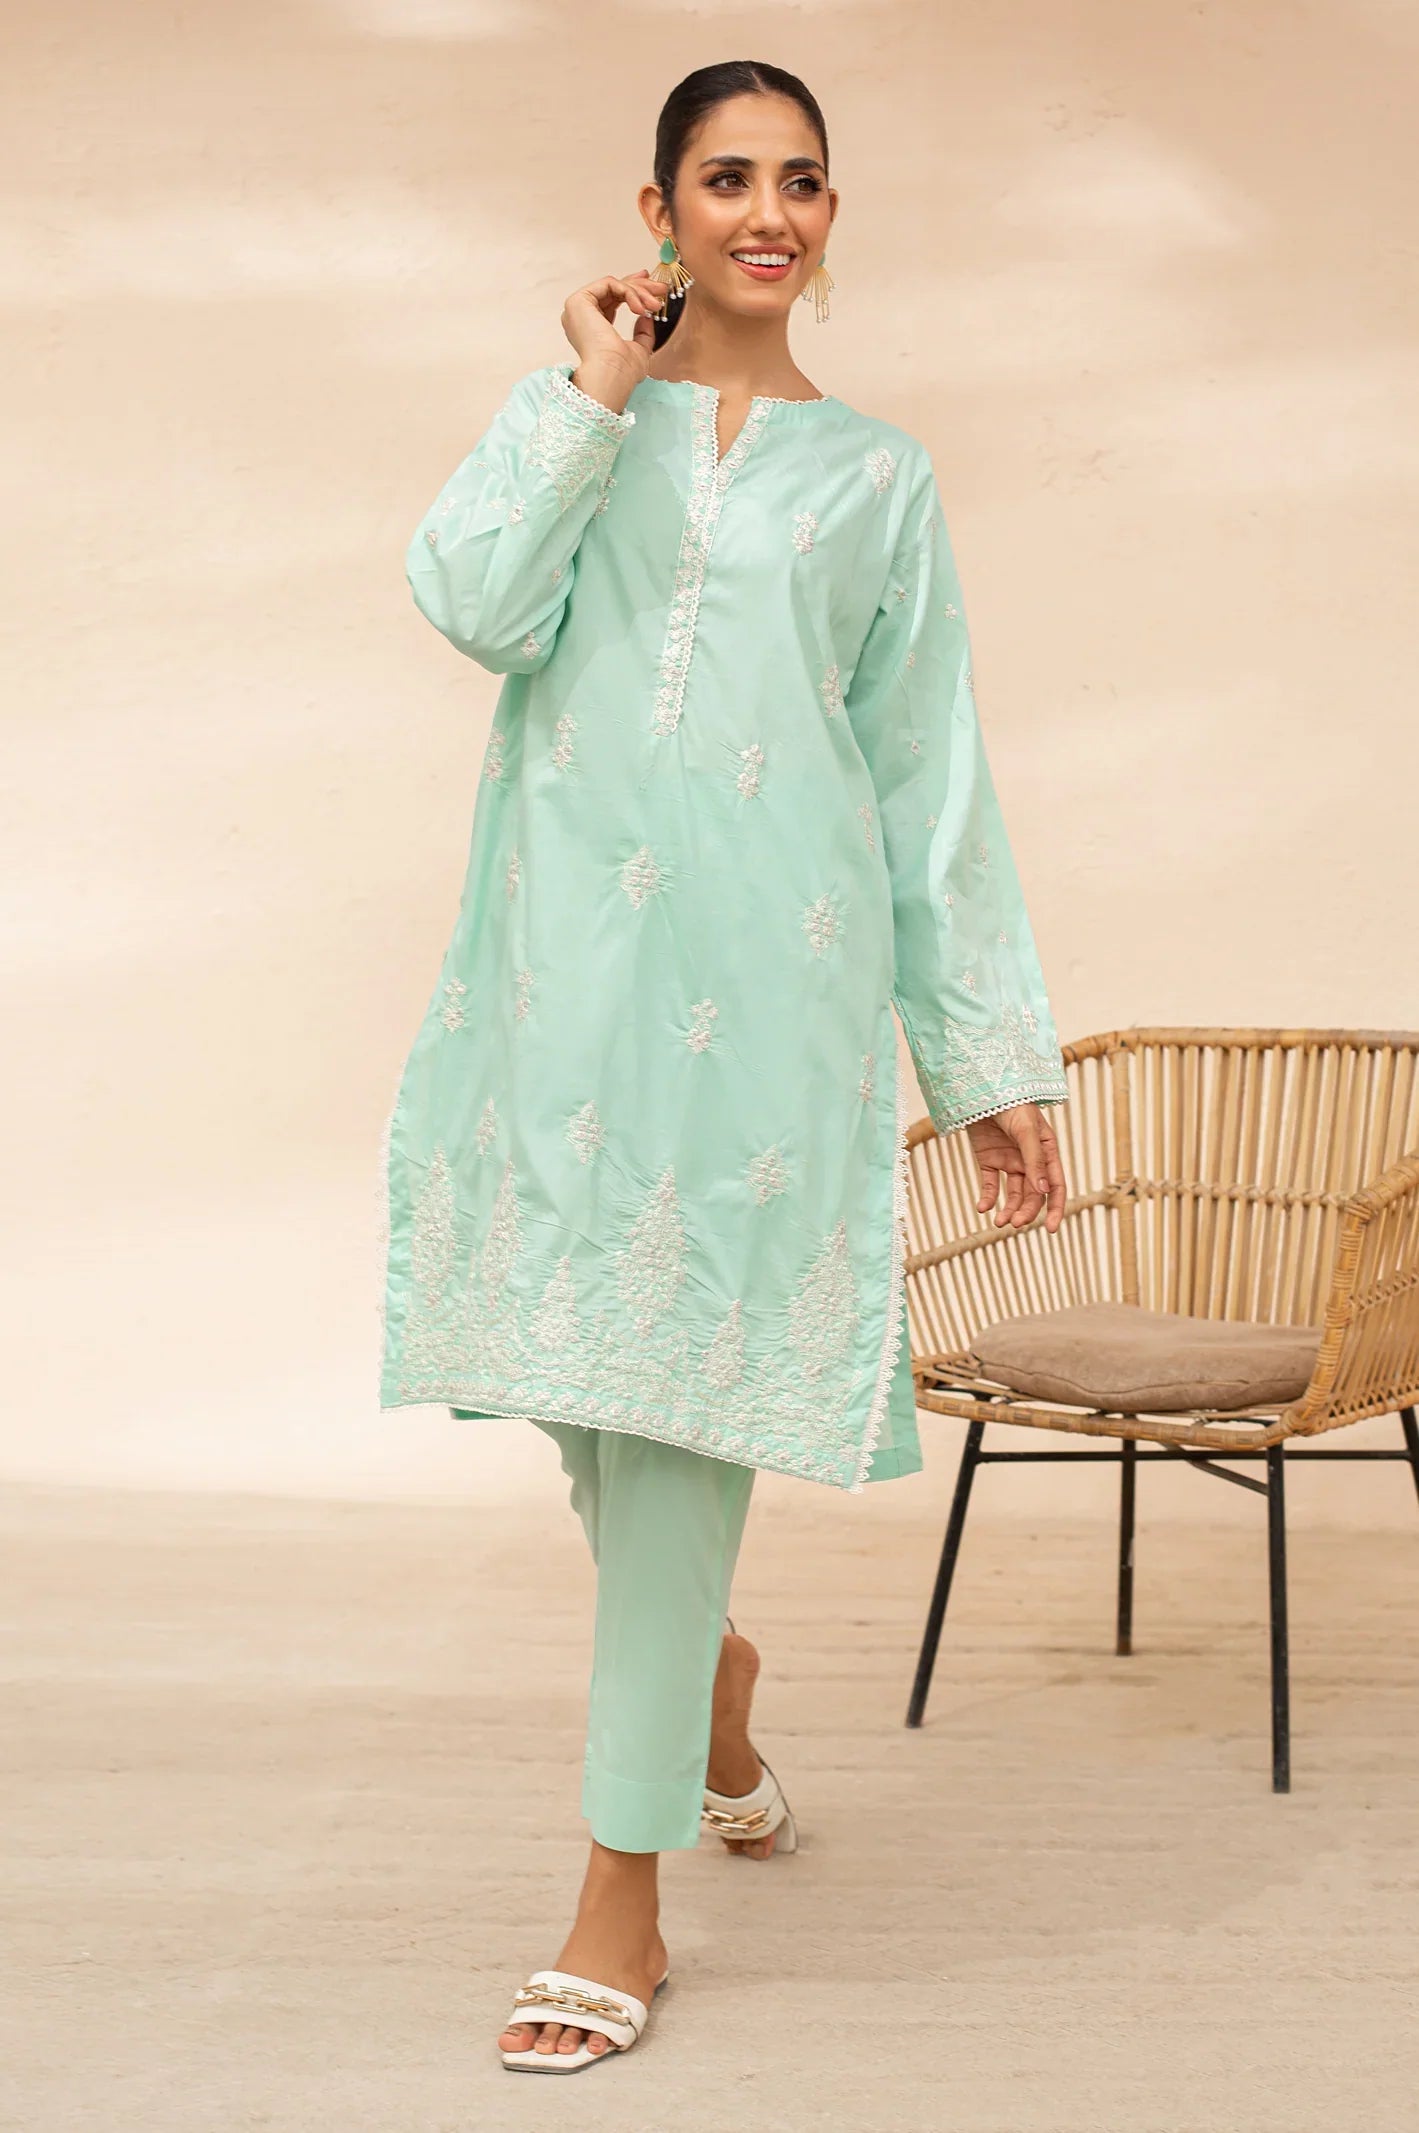 2PC Embroidered Suit - Diners